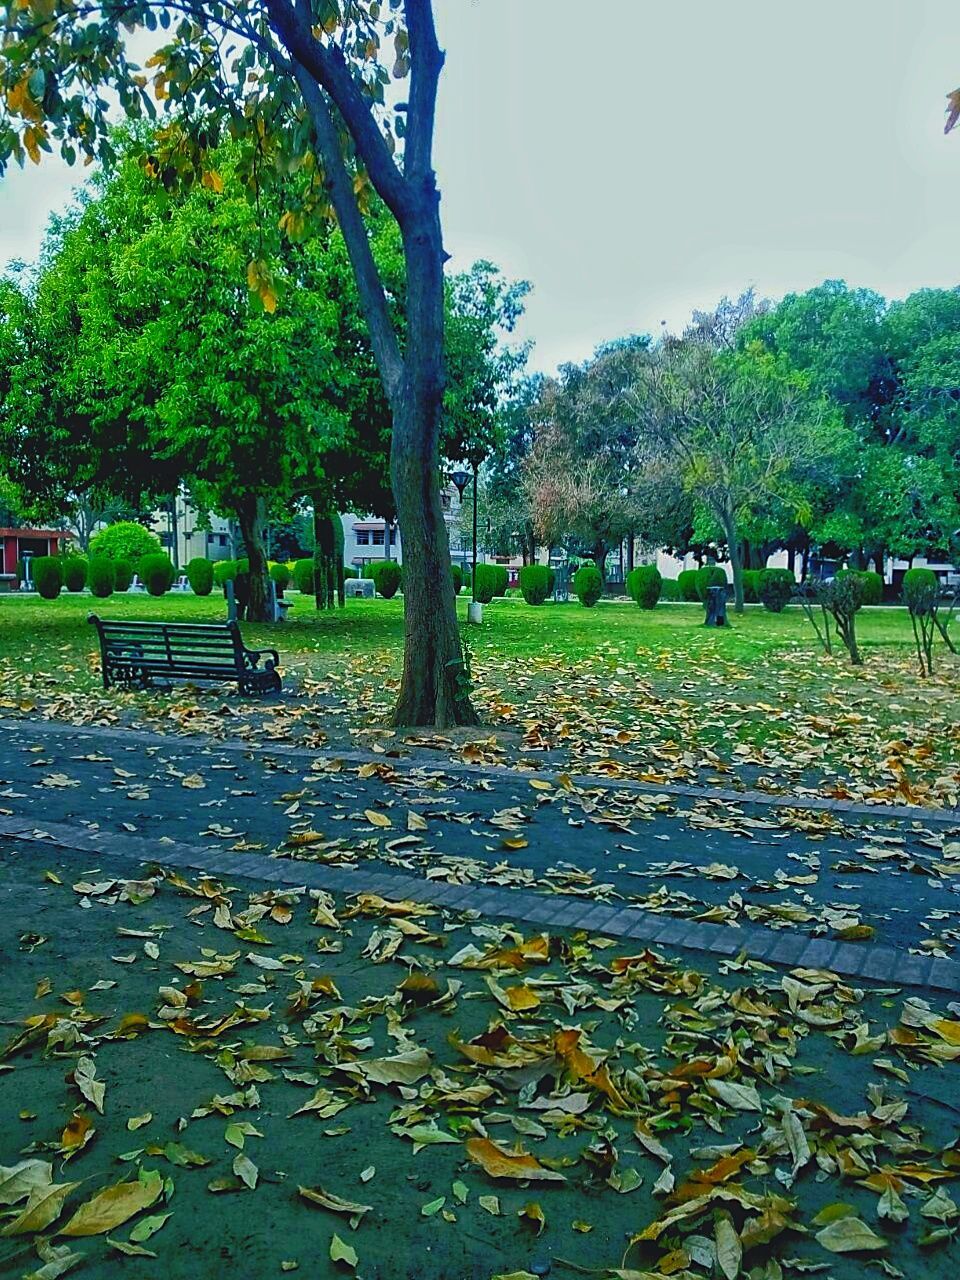 plant, tree, leaf, plant part, park, autumn, nature, park - man made space, green color, day, beauty in nature, change, growth, tranquility, falling, tranquil scene, outdoors, leaves, sky, scenics - nature, no people, park bench